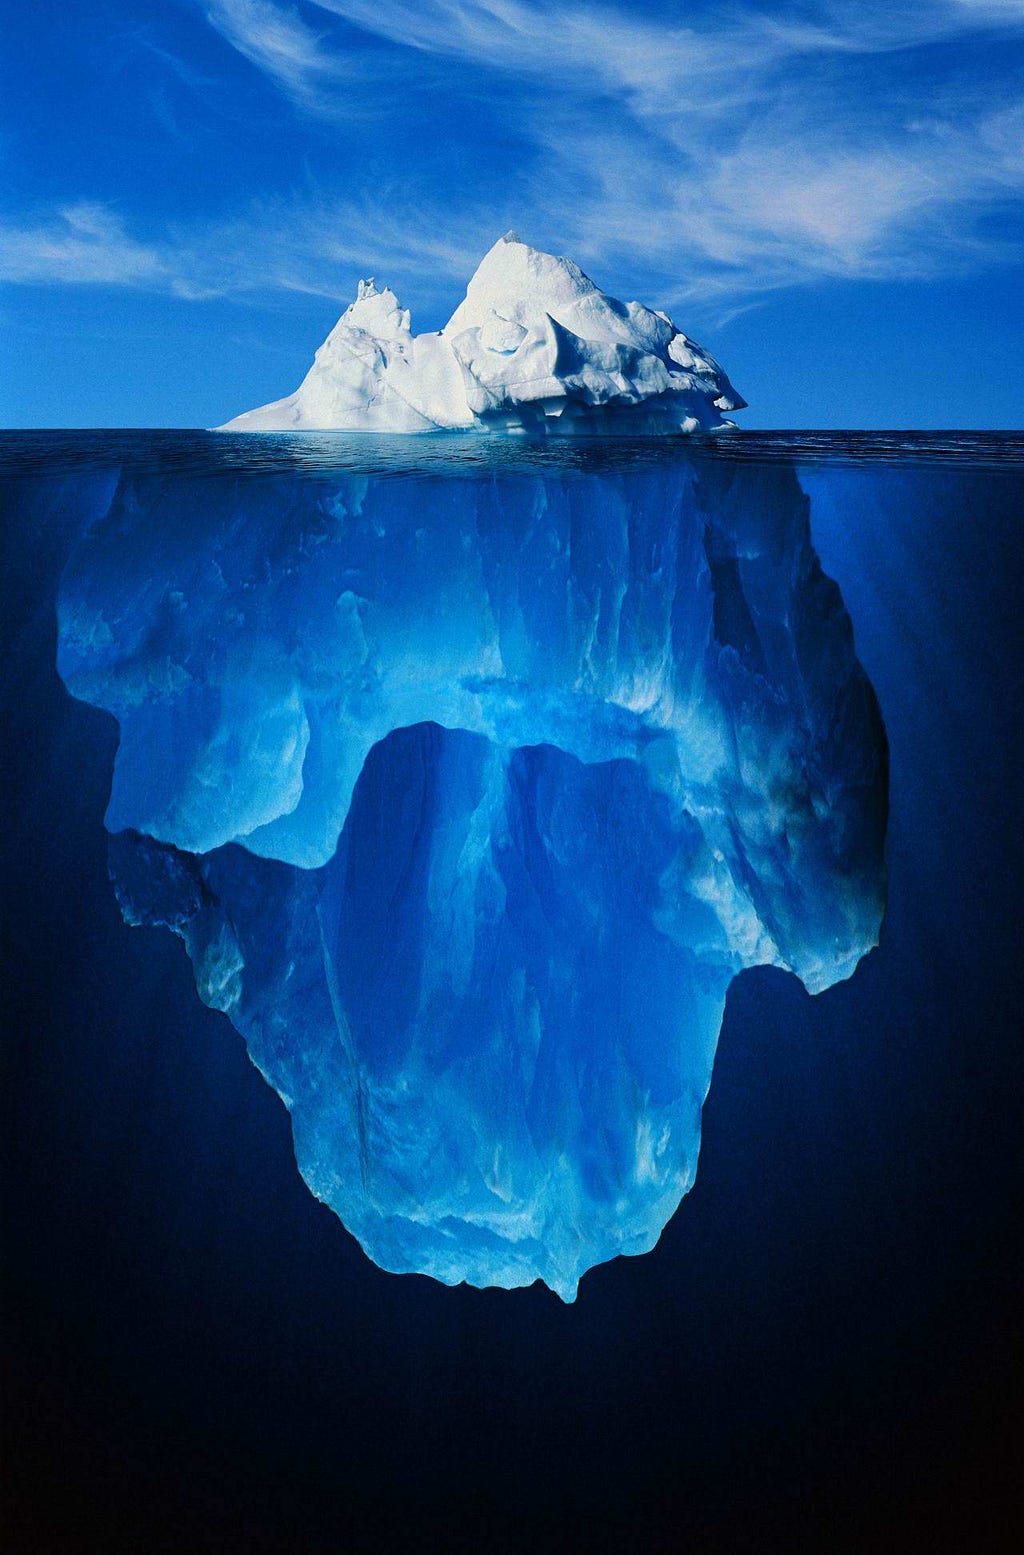 A picture of an iceberg showing its entirety, both above and below the ocean’s surface